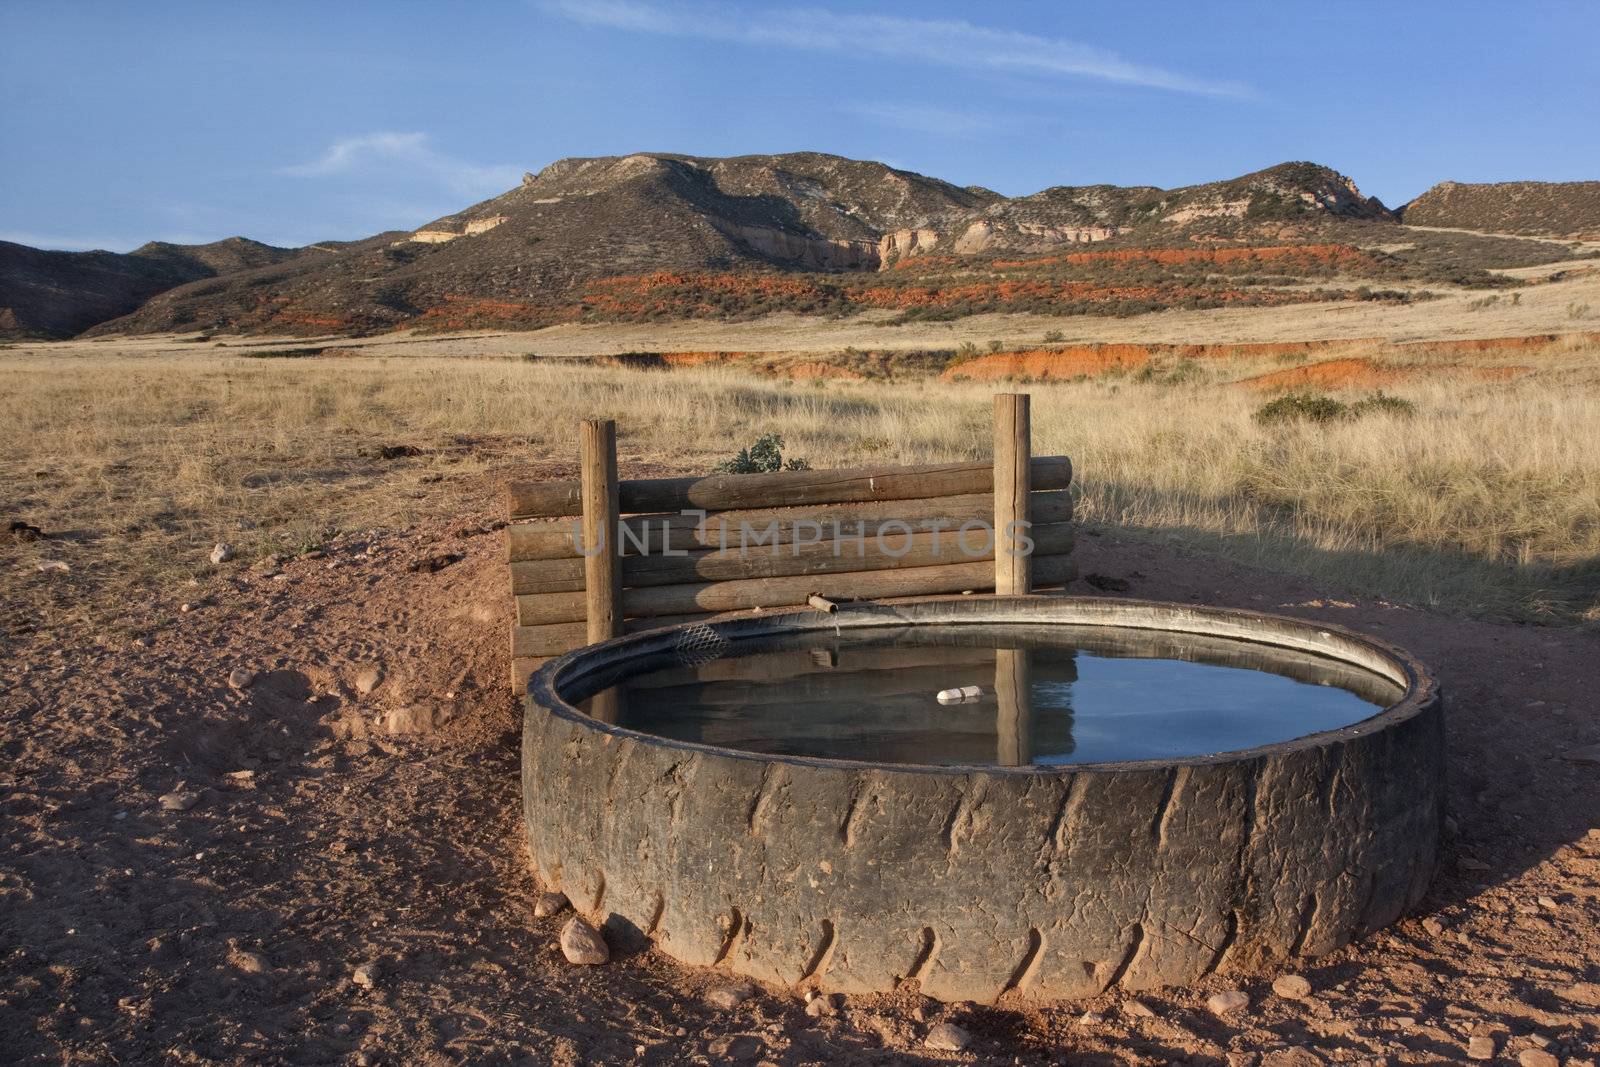 cattle watering hole in Red Mountain Open Space, semi desert landscape in northern Colorado near Wyoming border, late summer, reservoir fabricated from old giant tire